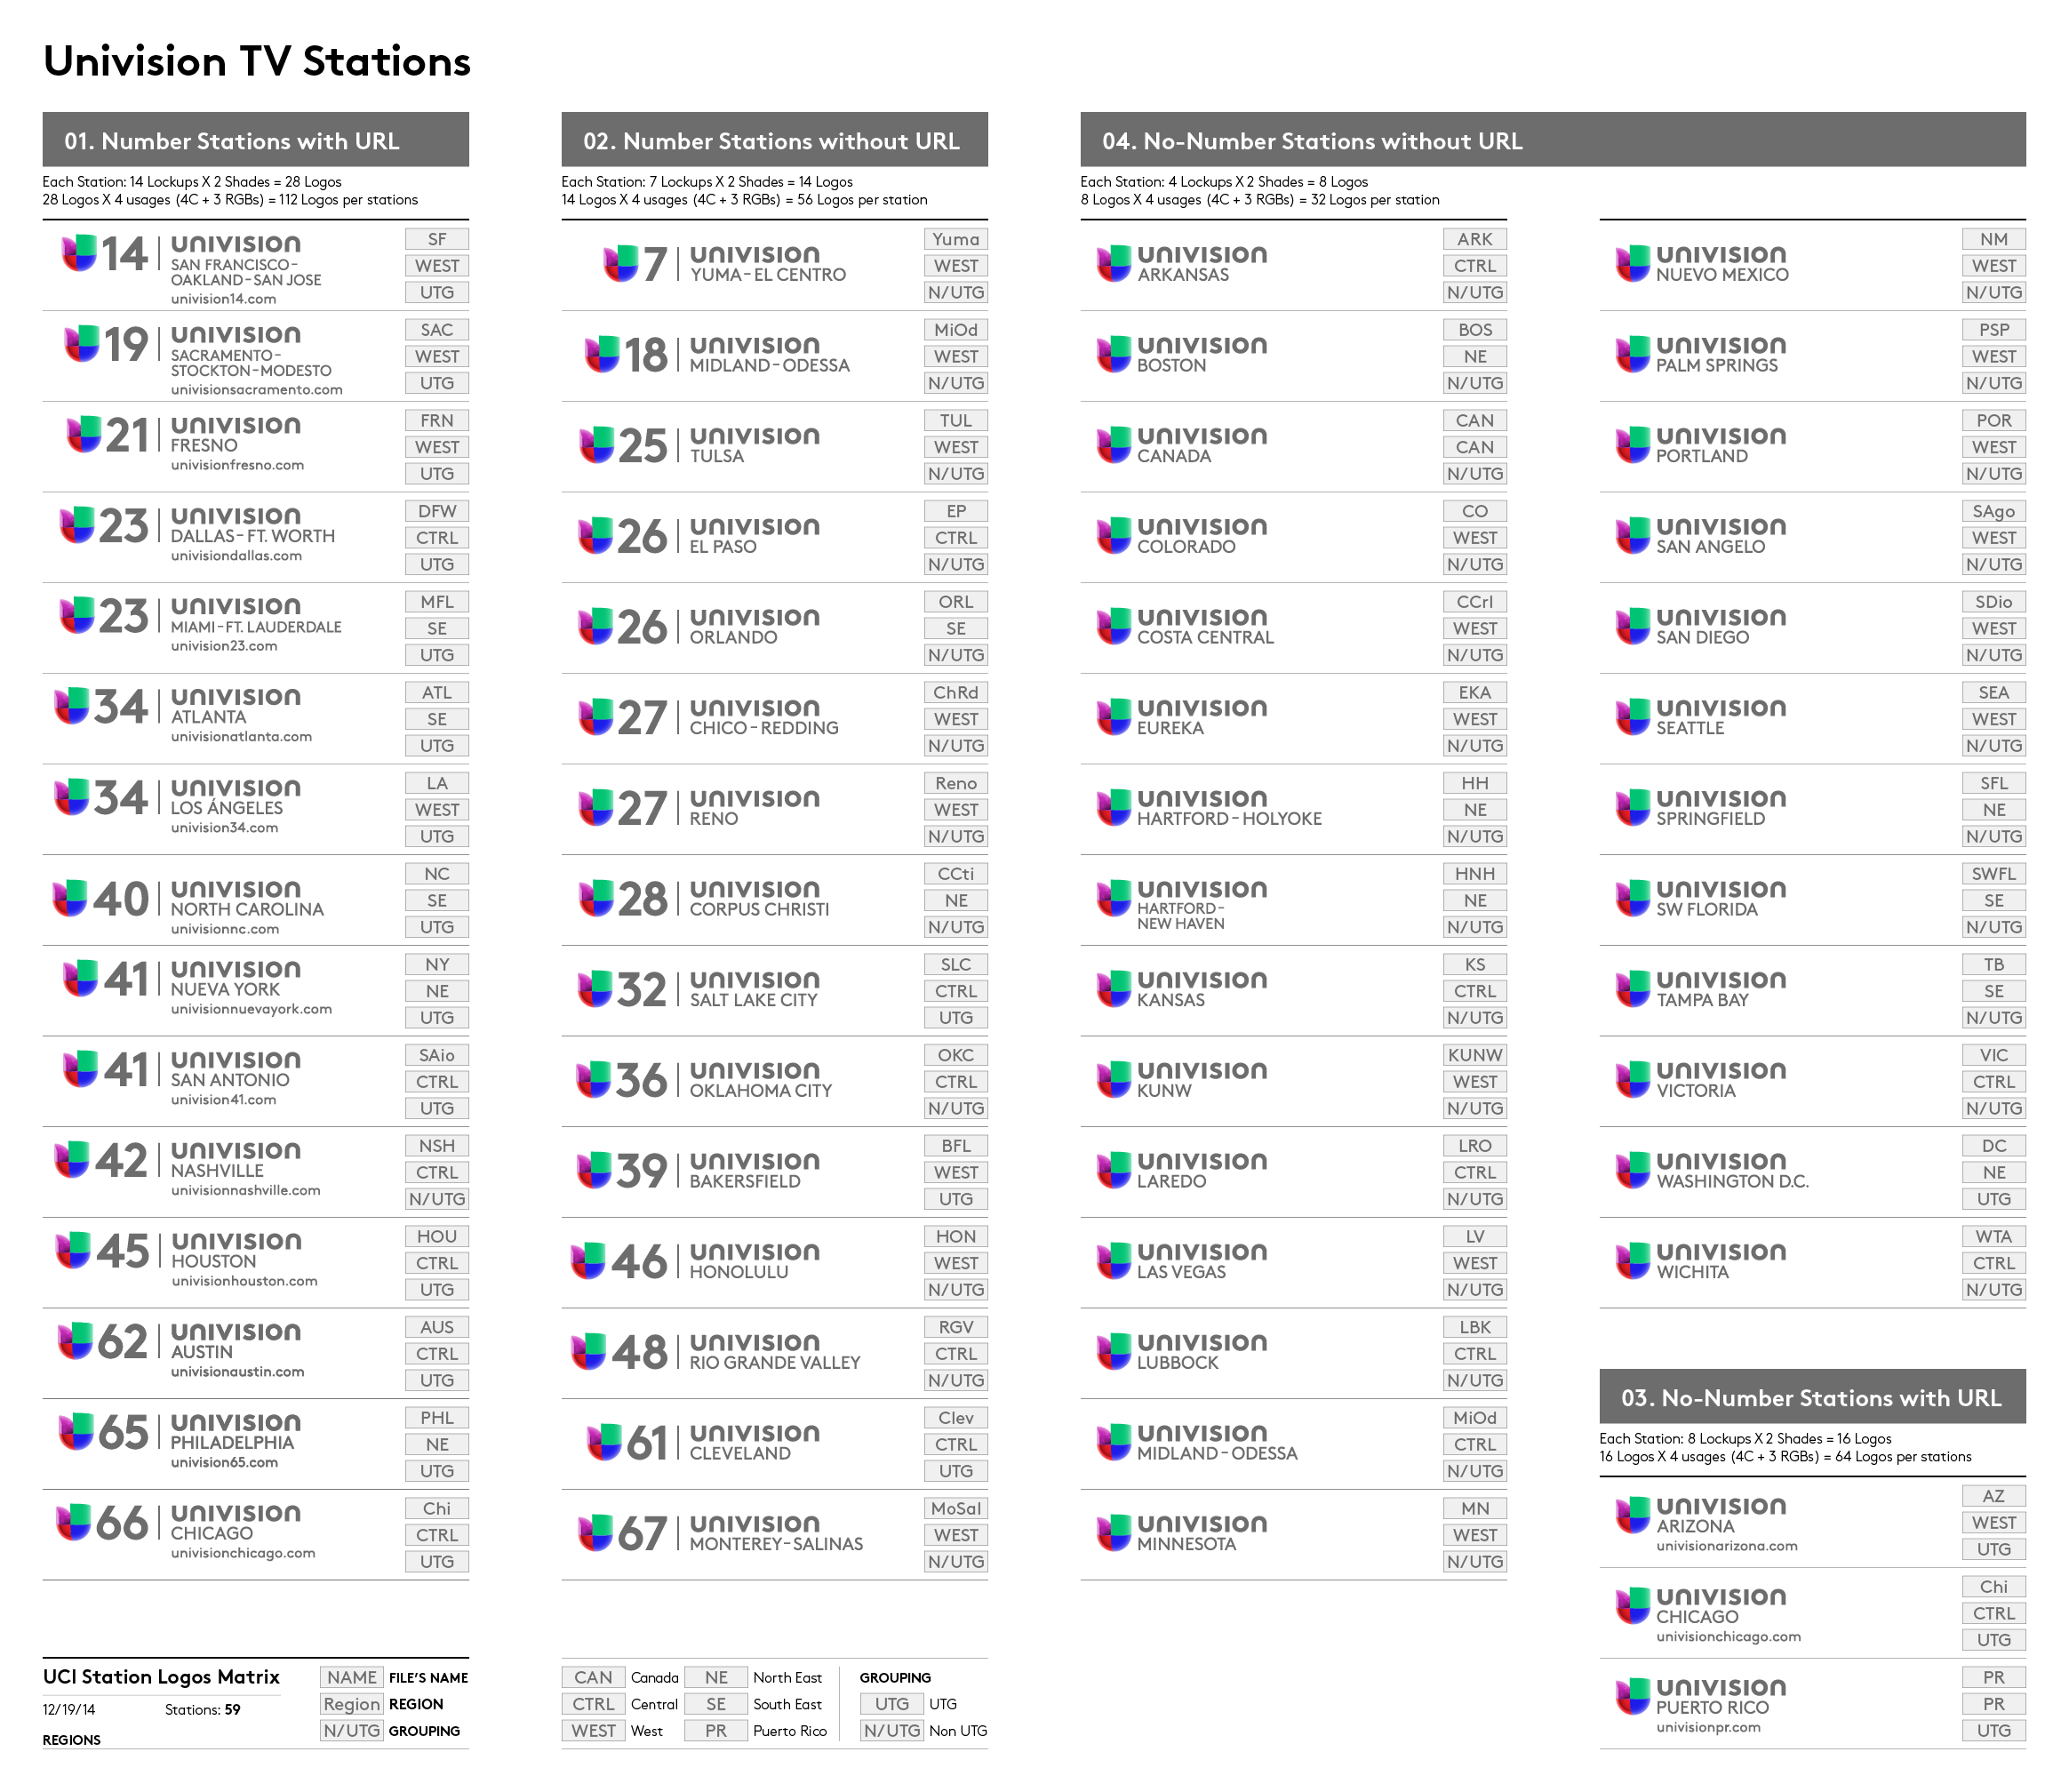 univision-tv-stations-2x